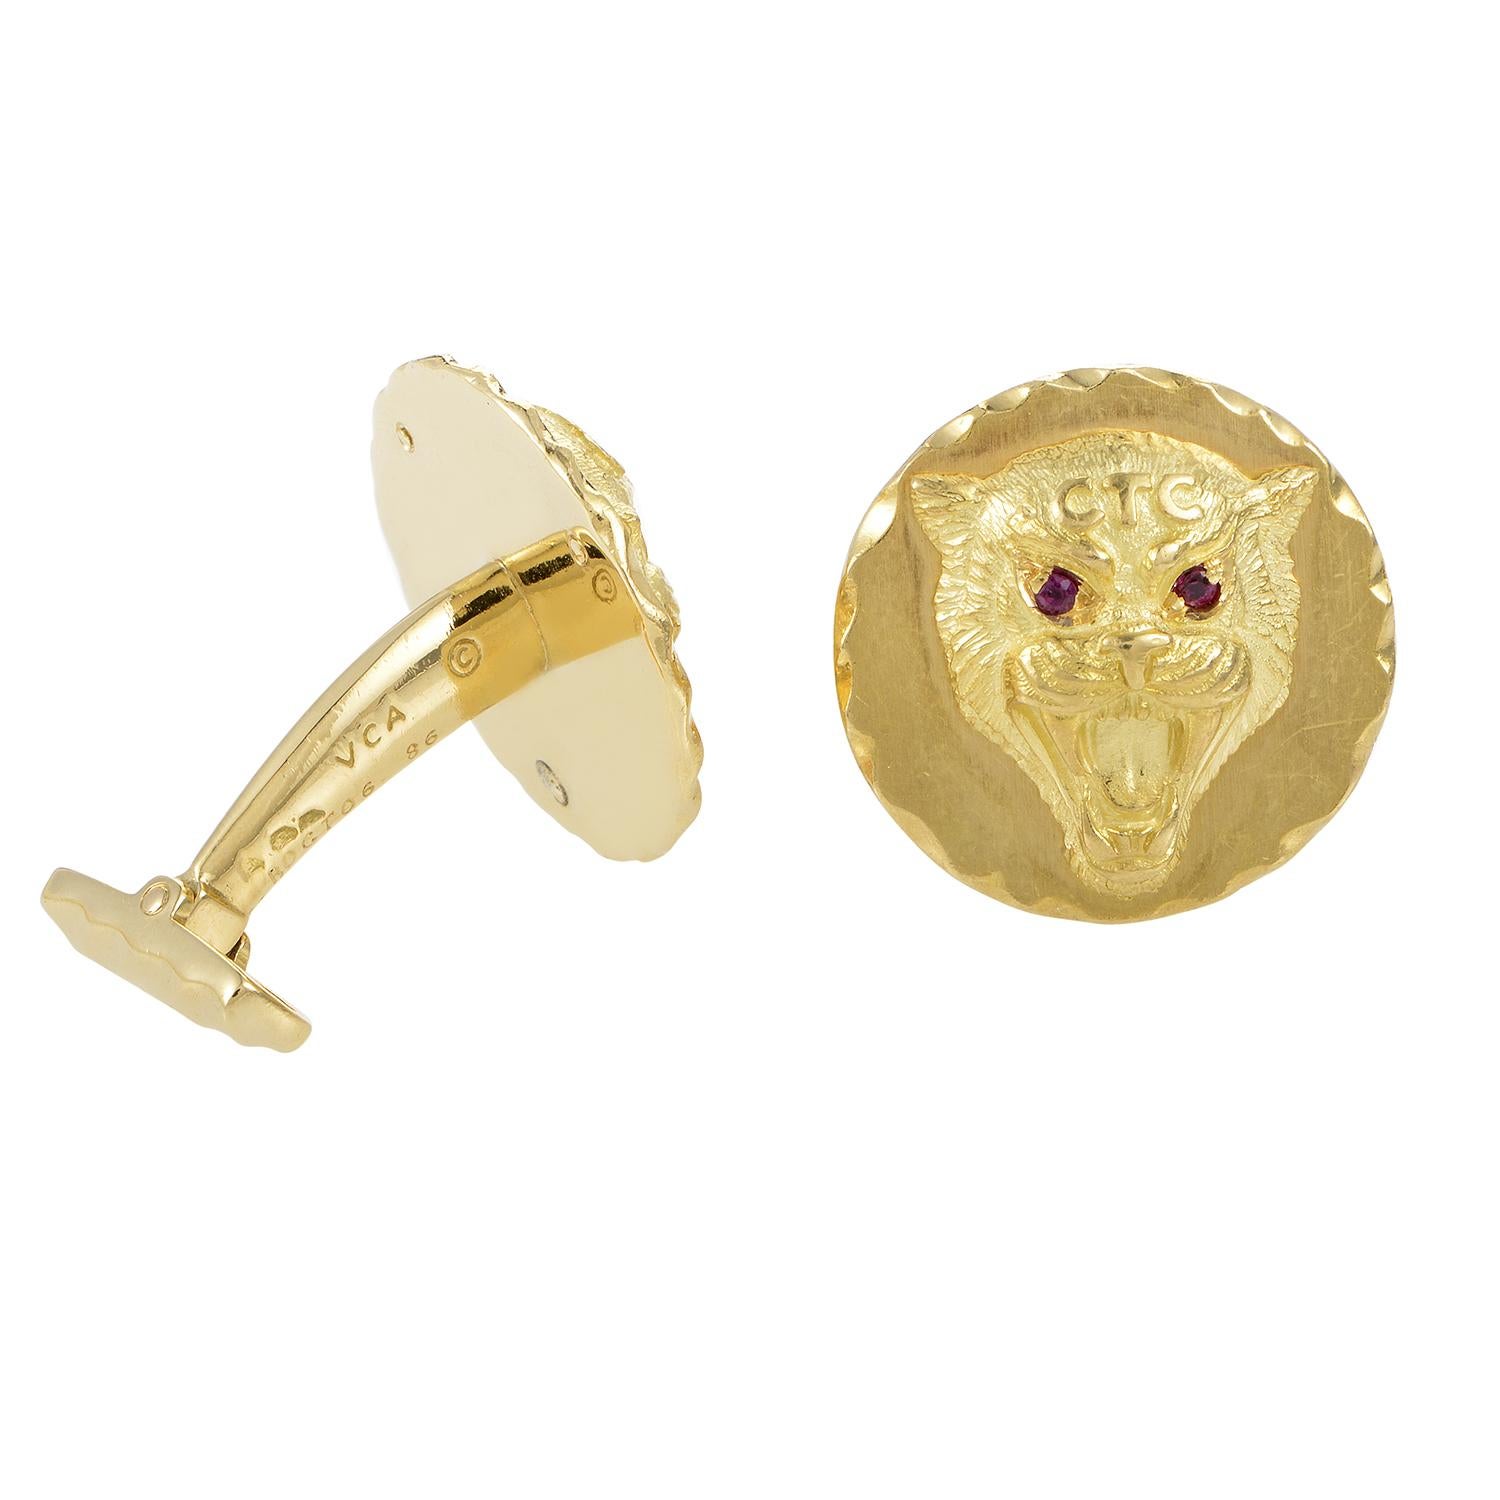 This pair of cufflinks from Van Cleef & Arpels are fiercely fashion-forward! They are made of 18K yellow gold and feature the depiction of a fearsome wildcat with glistening rubies for eyes.